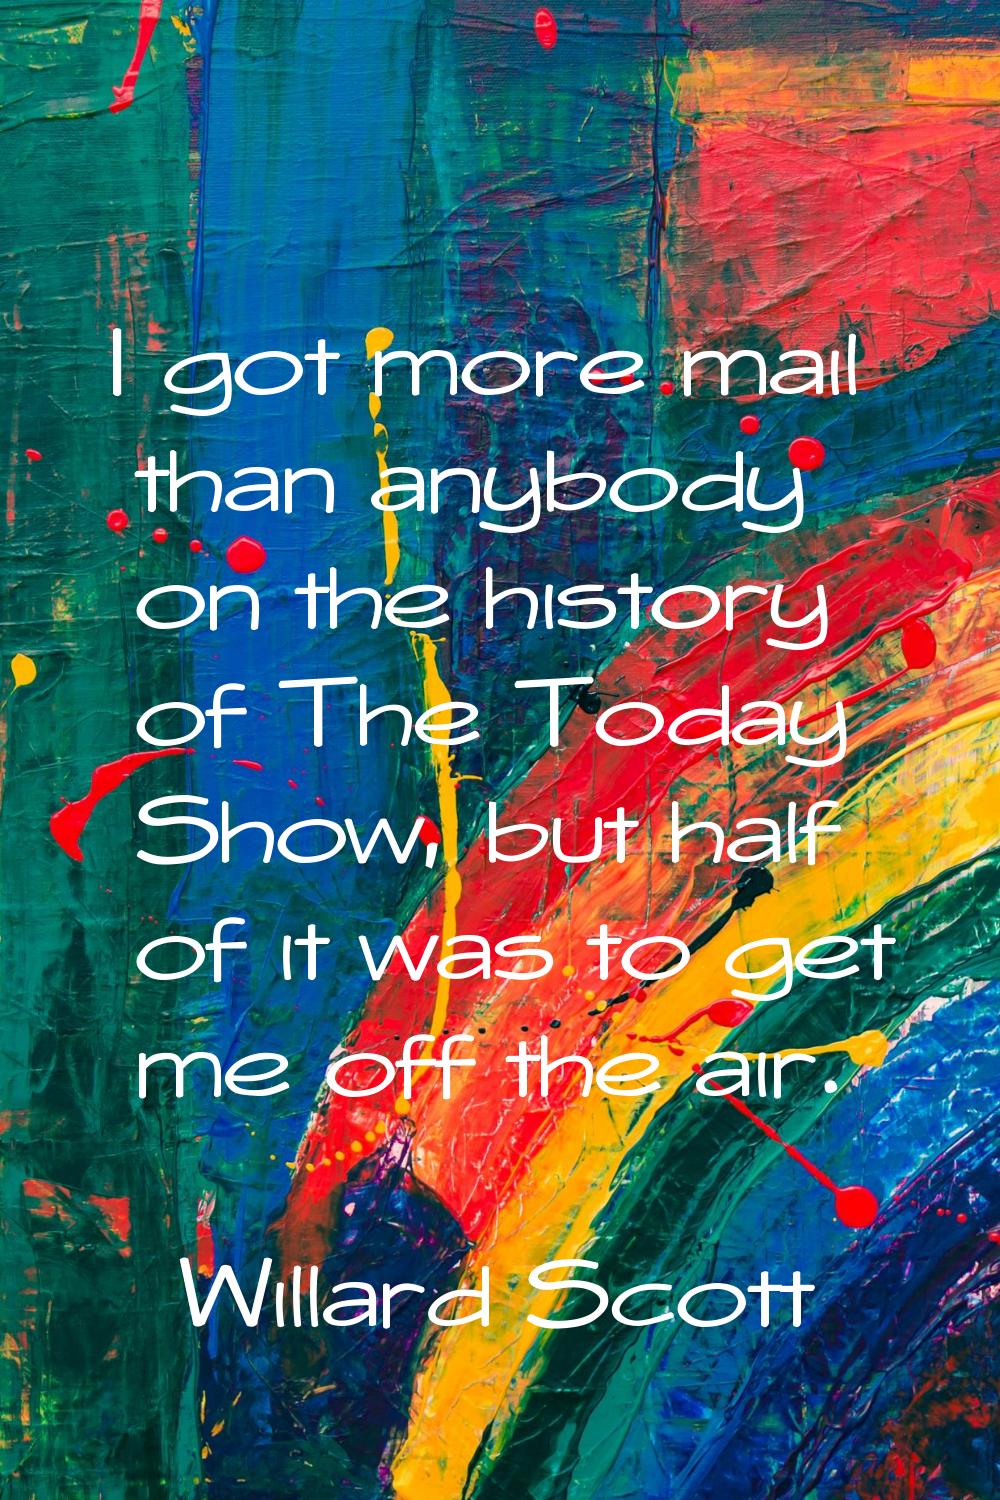 I got more mail than anybody on the history of The Today Show, but half of it was to get me off the